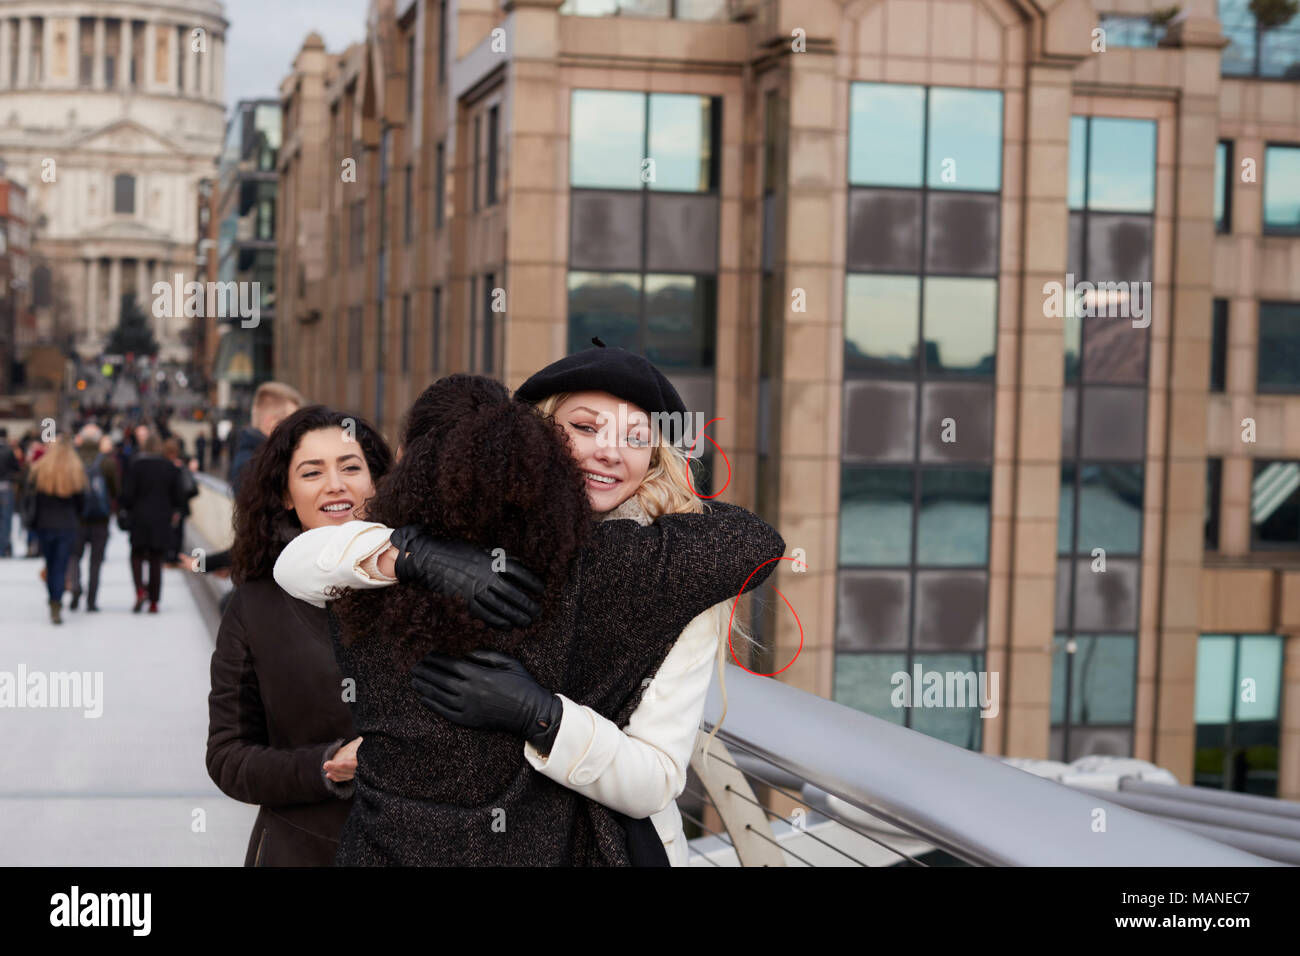 Group Of Female Friends Meeting On Winter Visit To London Stock Photo